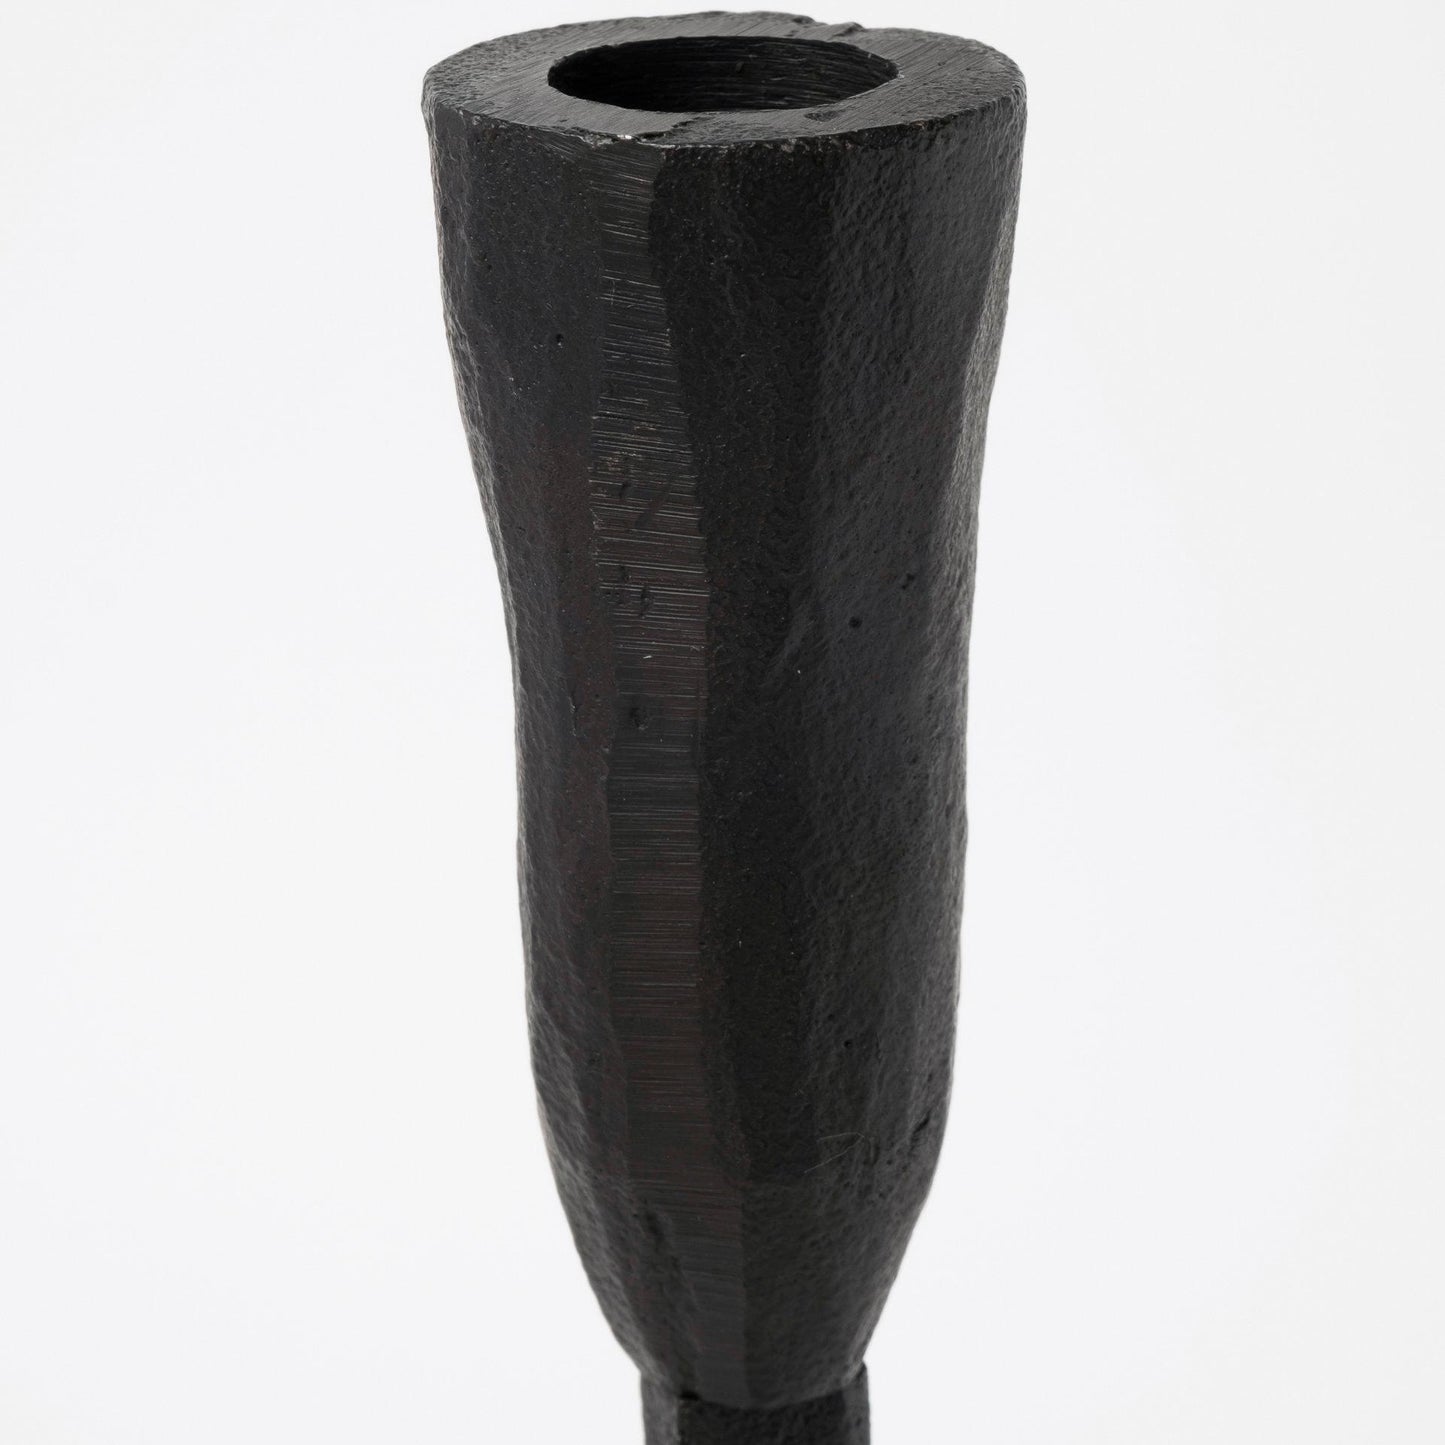 Levit (Small) Black Table Candle Holder